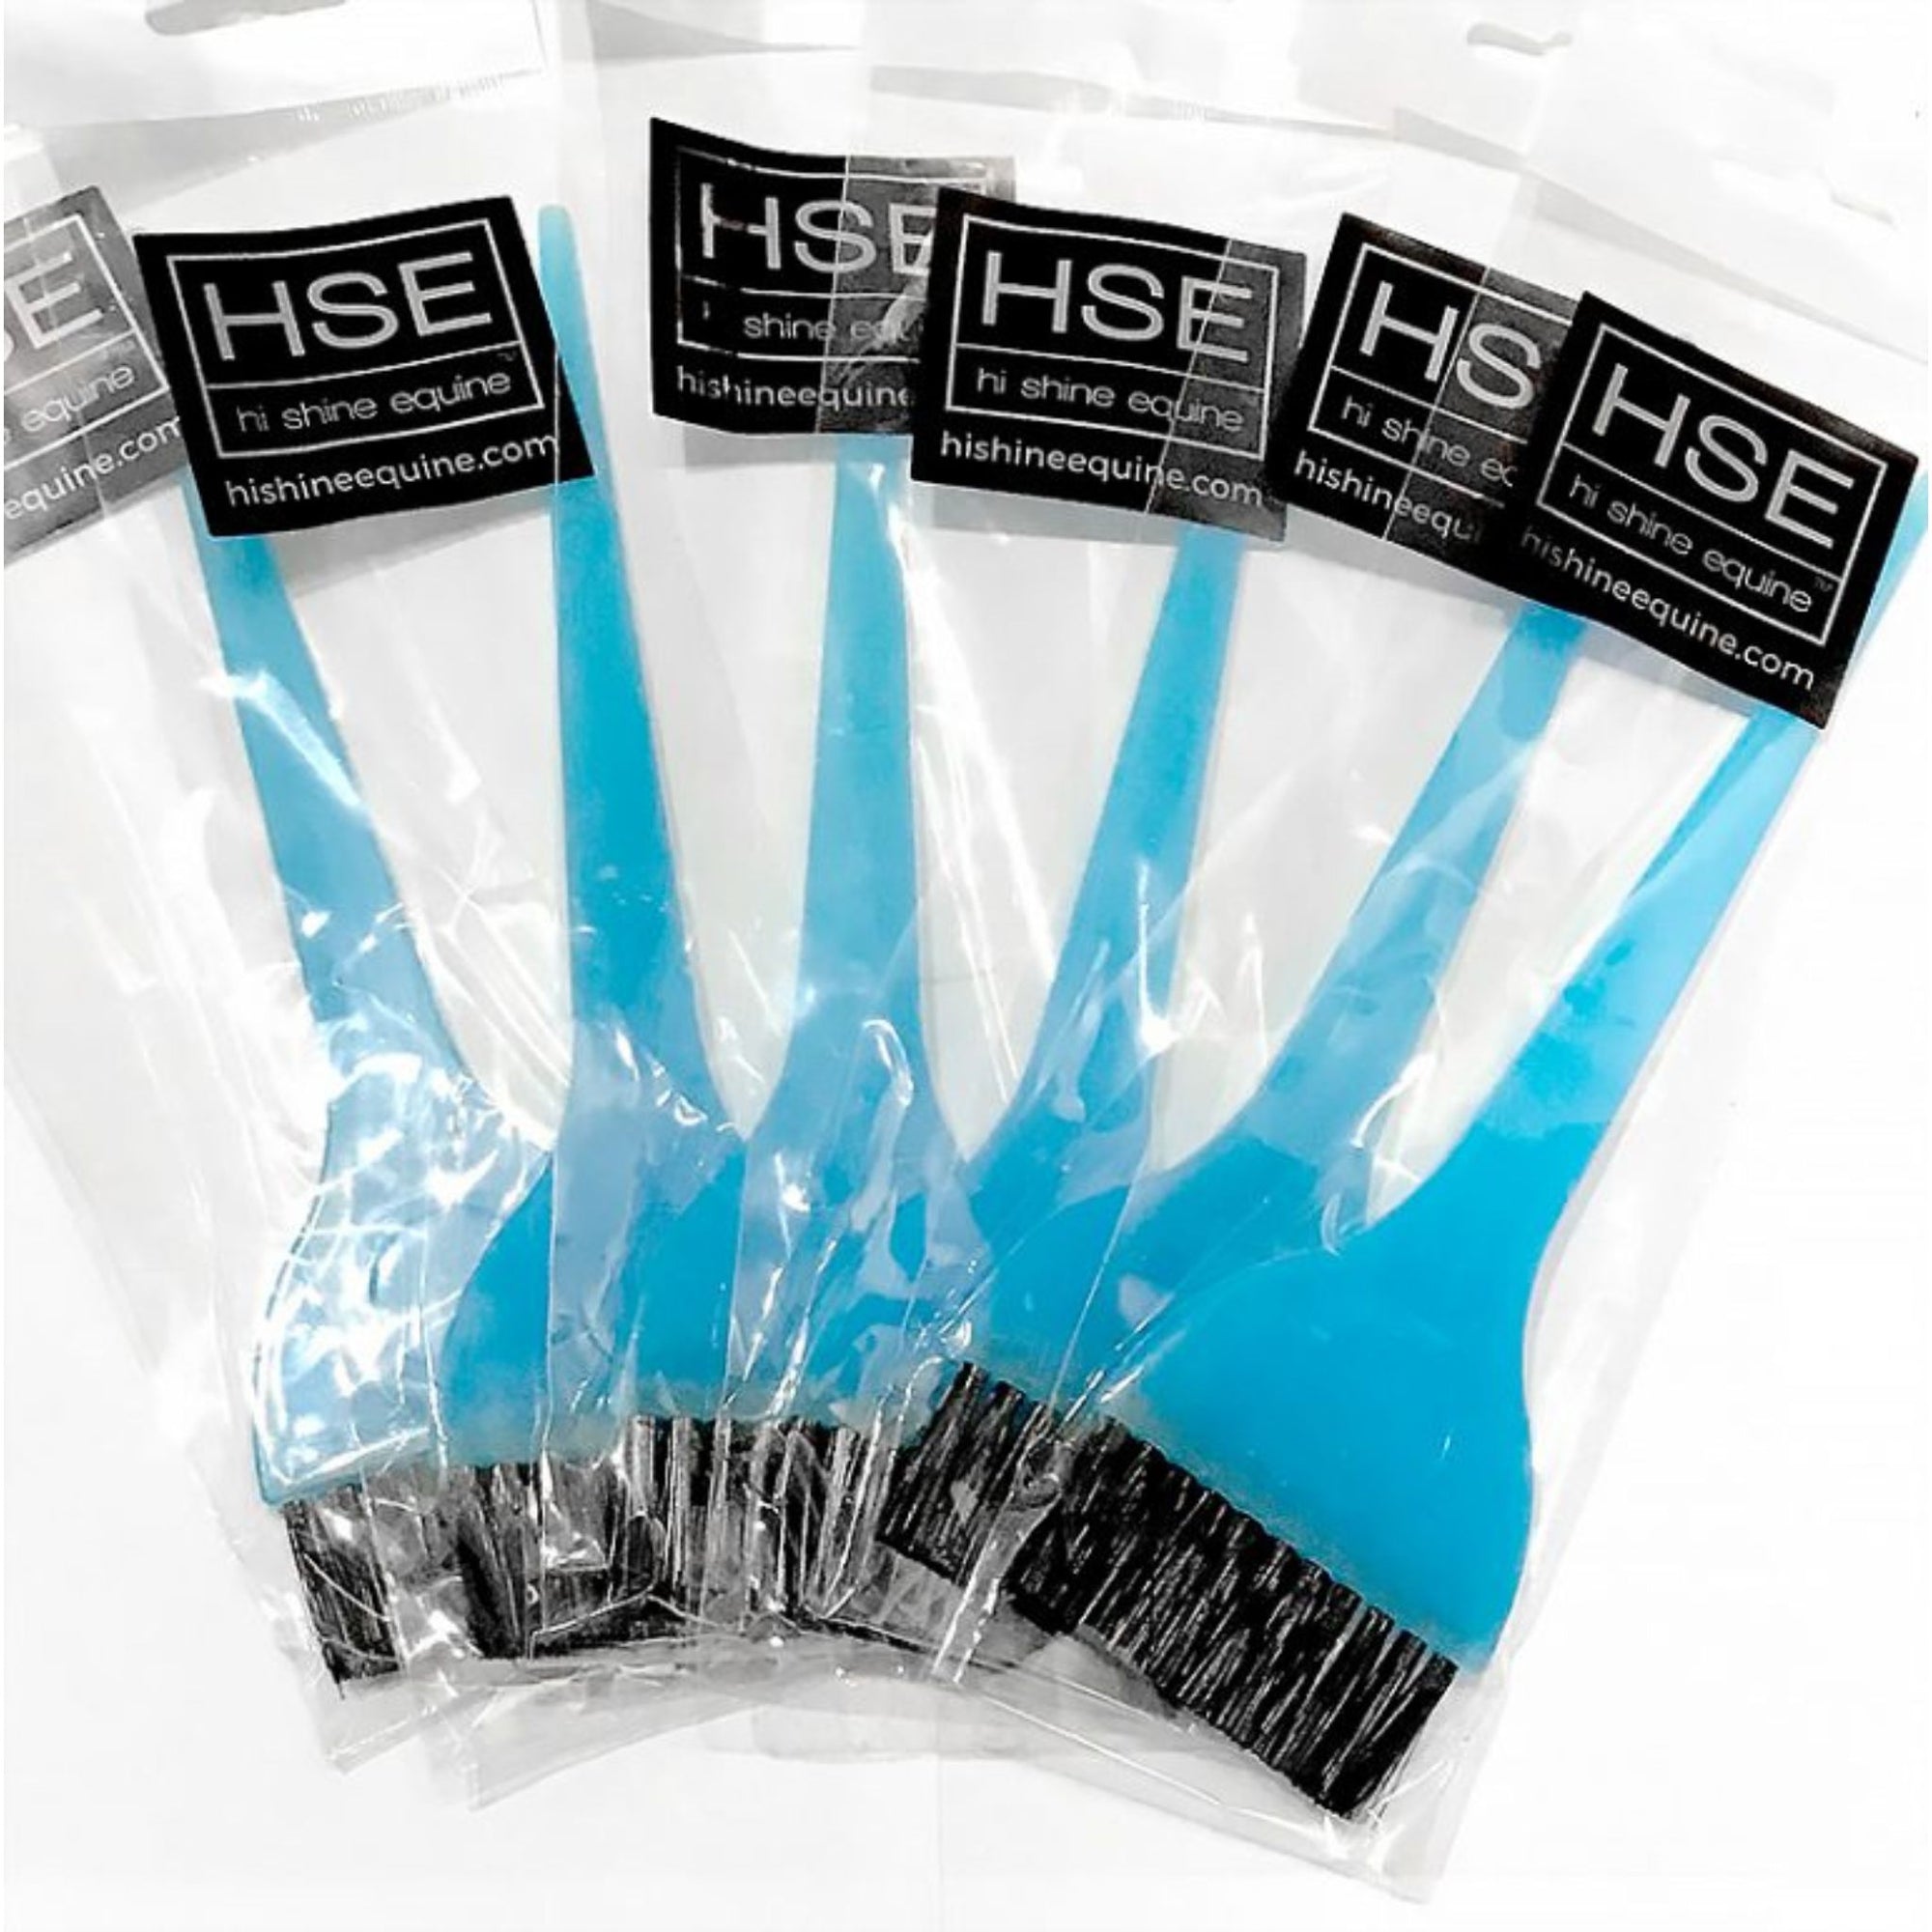 Blue hairdresser brush with black bristles in a clear plastic bag with  HSE sticker